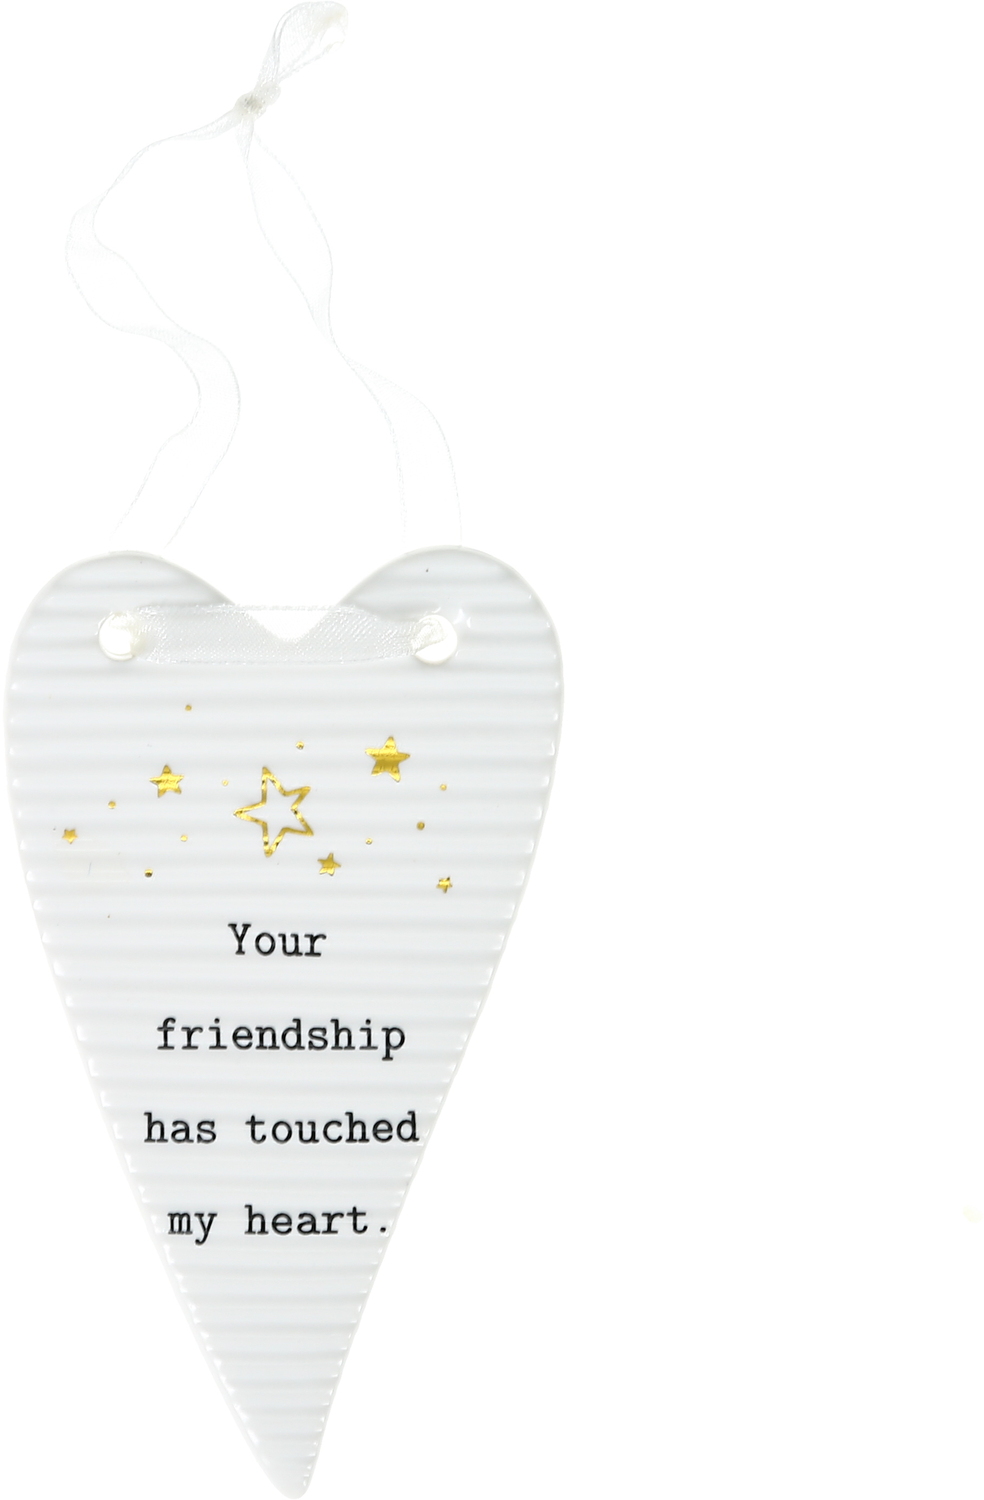 Friendship by Thoughtful Words - Friendship - 4" Hanging Heart Plaque